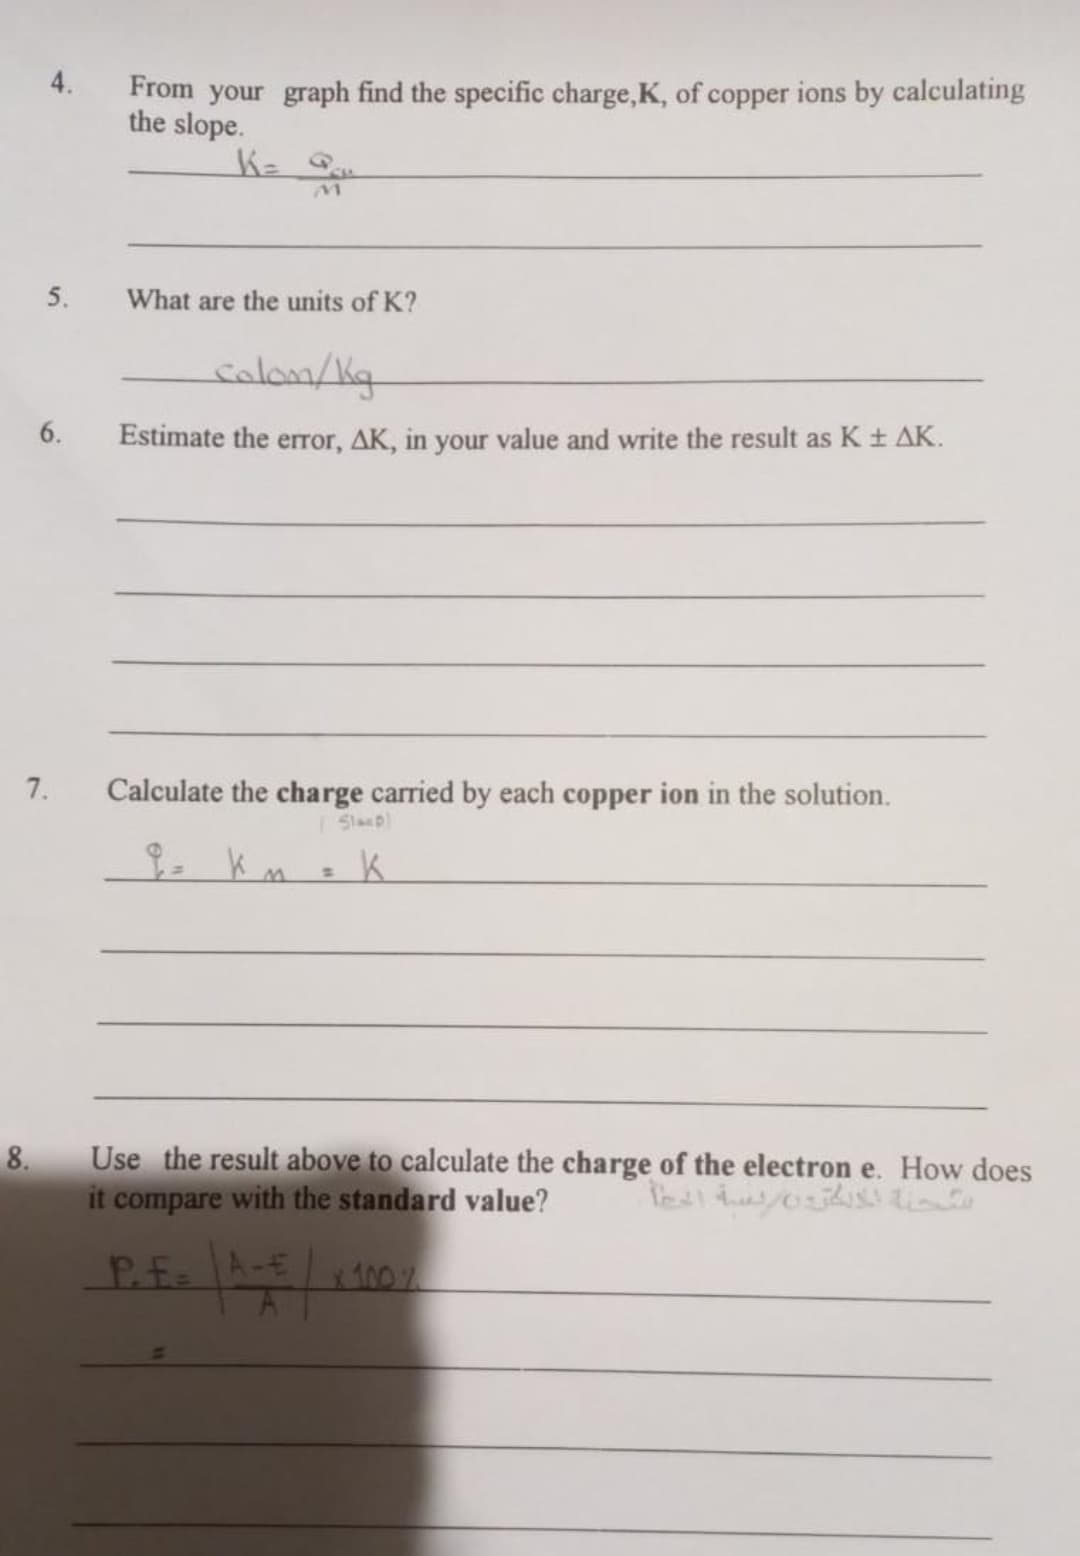 4.
From your graph find the specific charge,K, of copper ions by calculating
the slope.
5.
What are the units of K?
colon/Kg
6.
Estimate the error, AK, in your value and write the result as K ± AK.
7.
Calculate the charge carried by each copper ion in the solution.
Slaep)
8.
Use the result above to calculate the charge of the electron e. How does
it compare with the standard value?
Pf A-t 100 %
